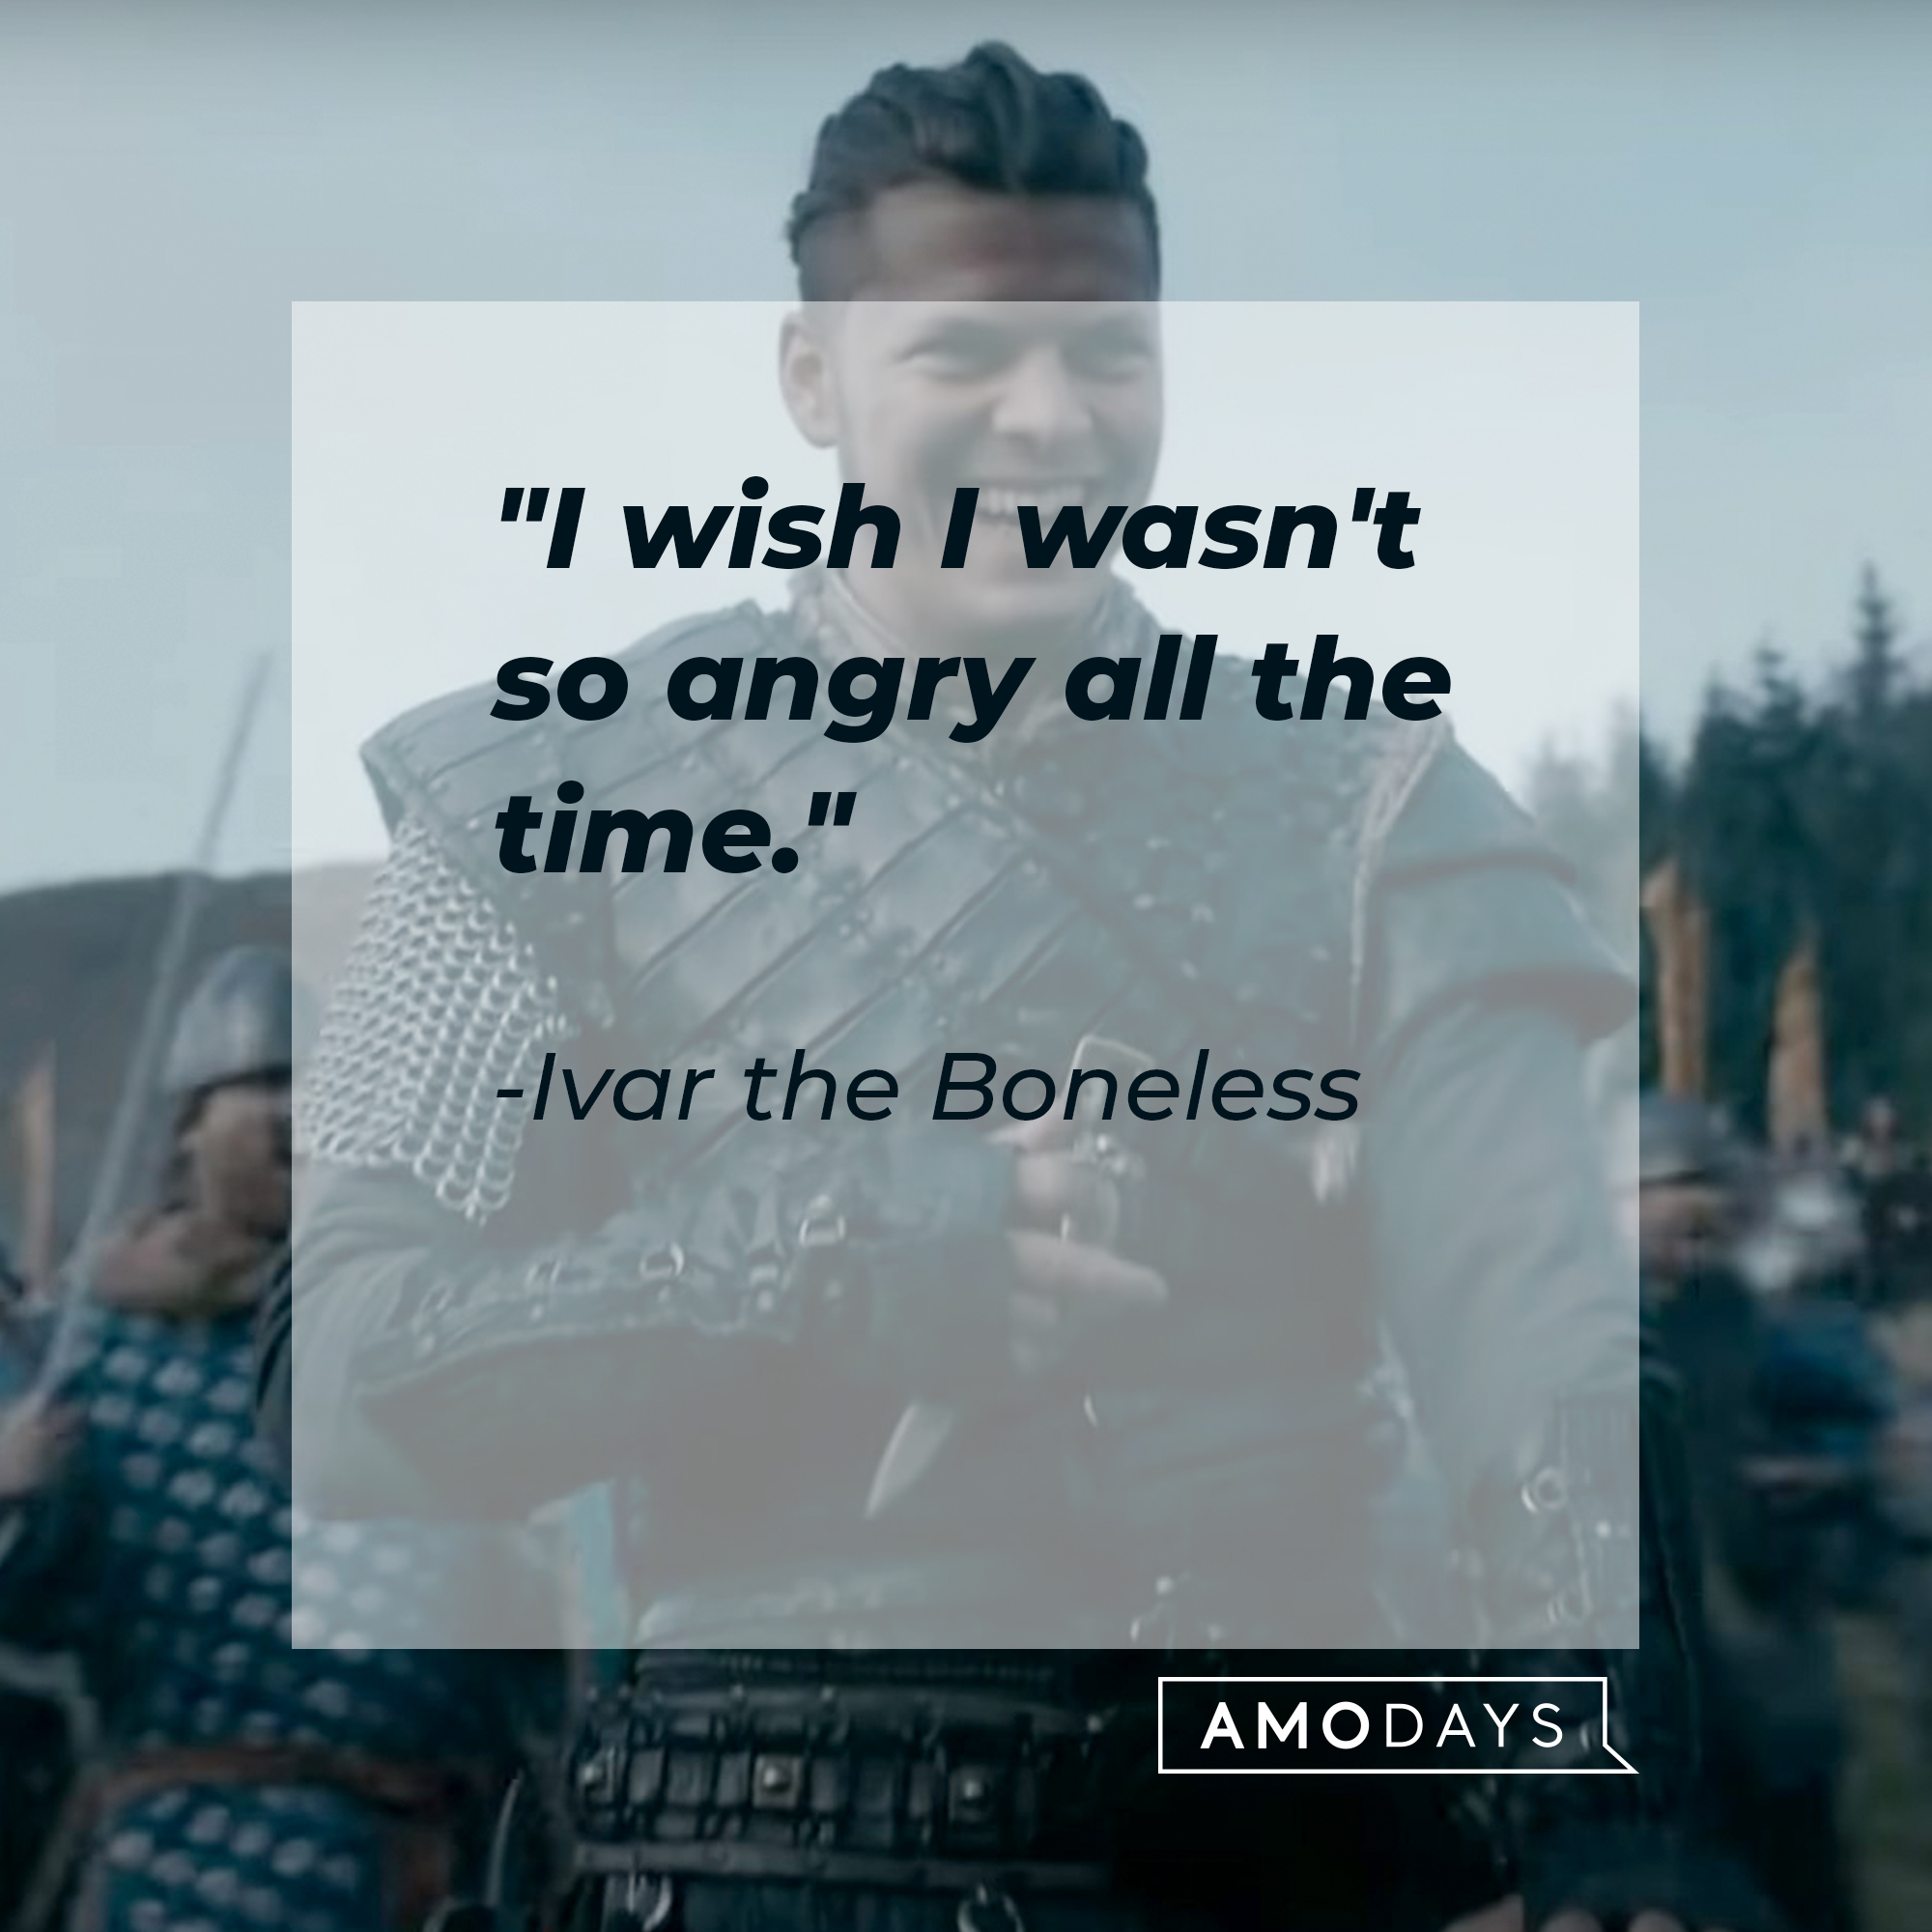 A picture of Ivar the Boneless with his quote: "I wish I wasn't so angry all the time."┃Source: youtube.com/PrimeVideoUK